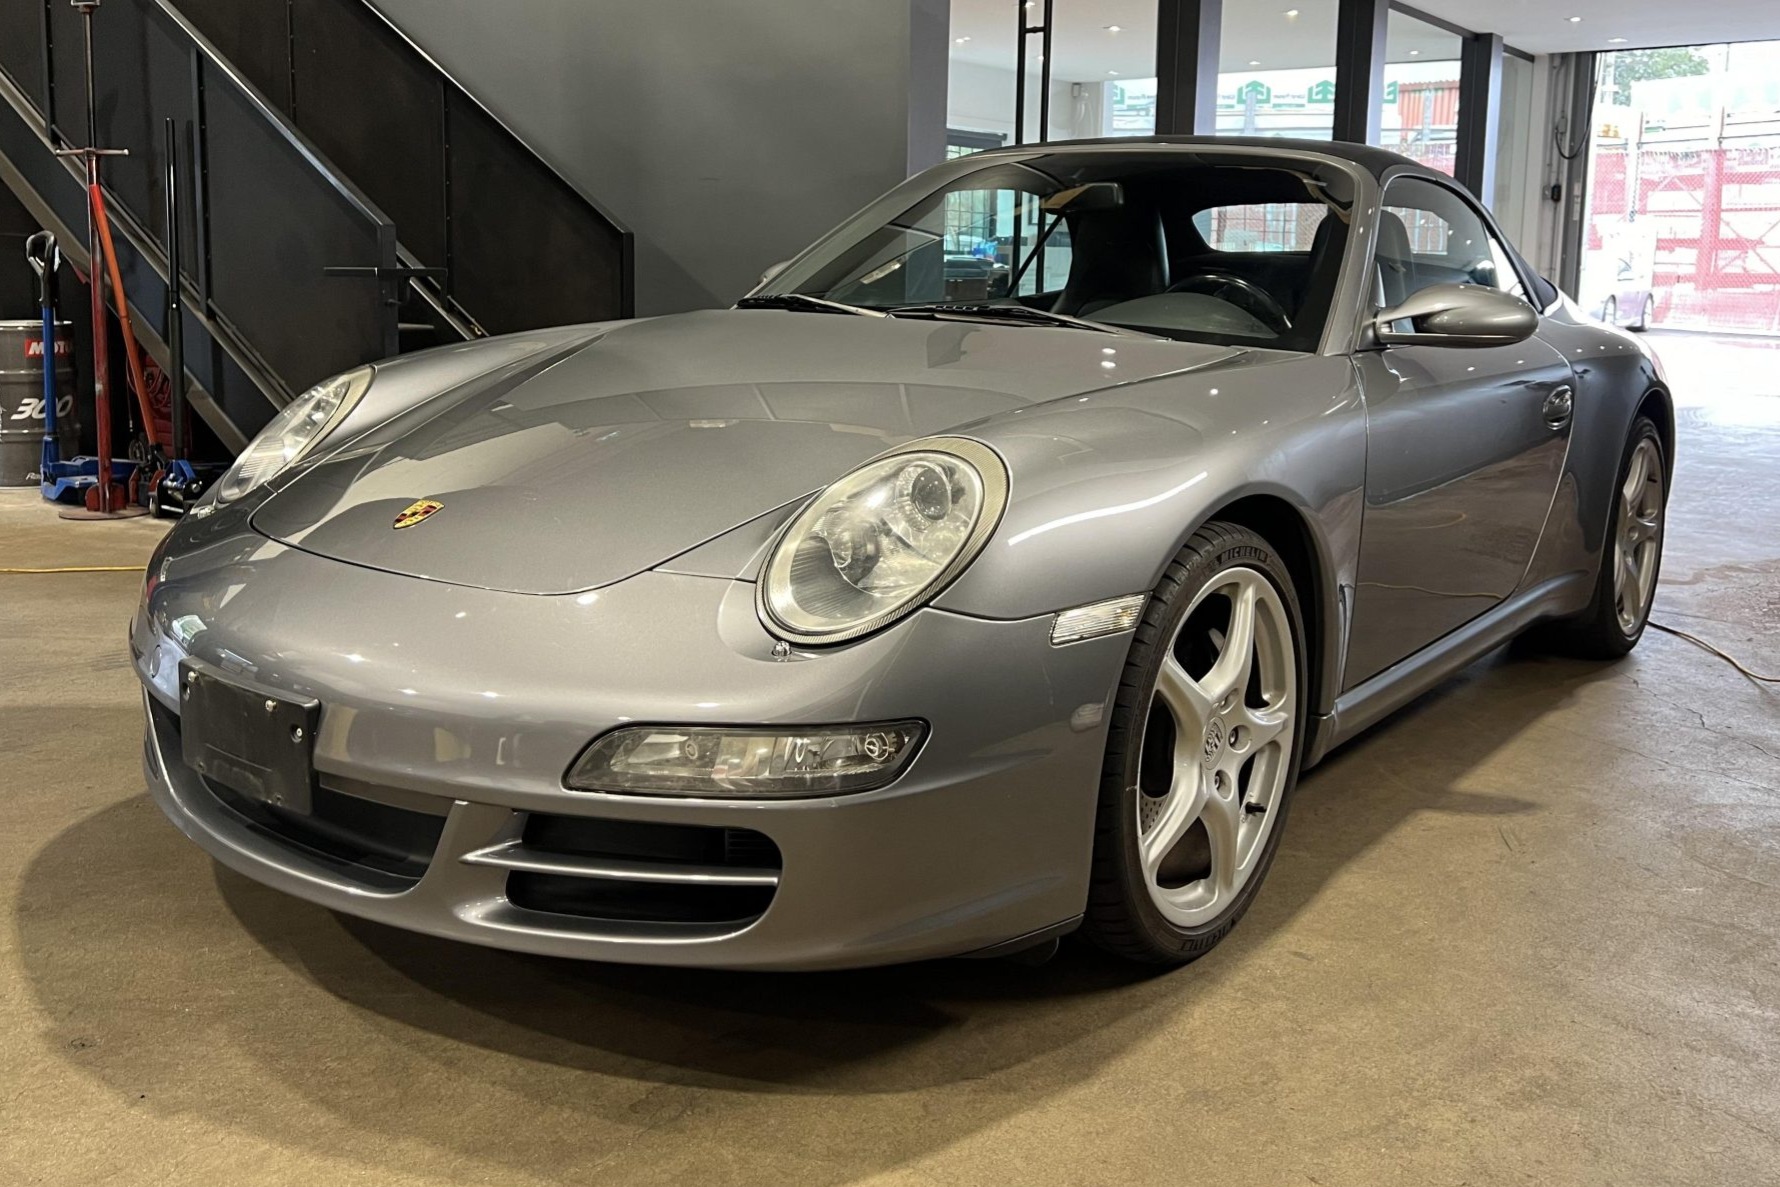 Used 2006 Porsche 911 Carrera Cabriolet 6-Speed Project Review